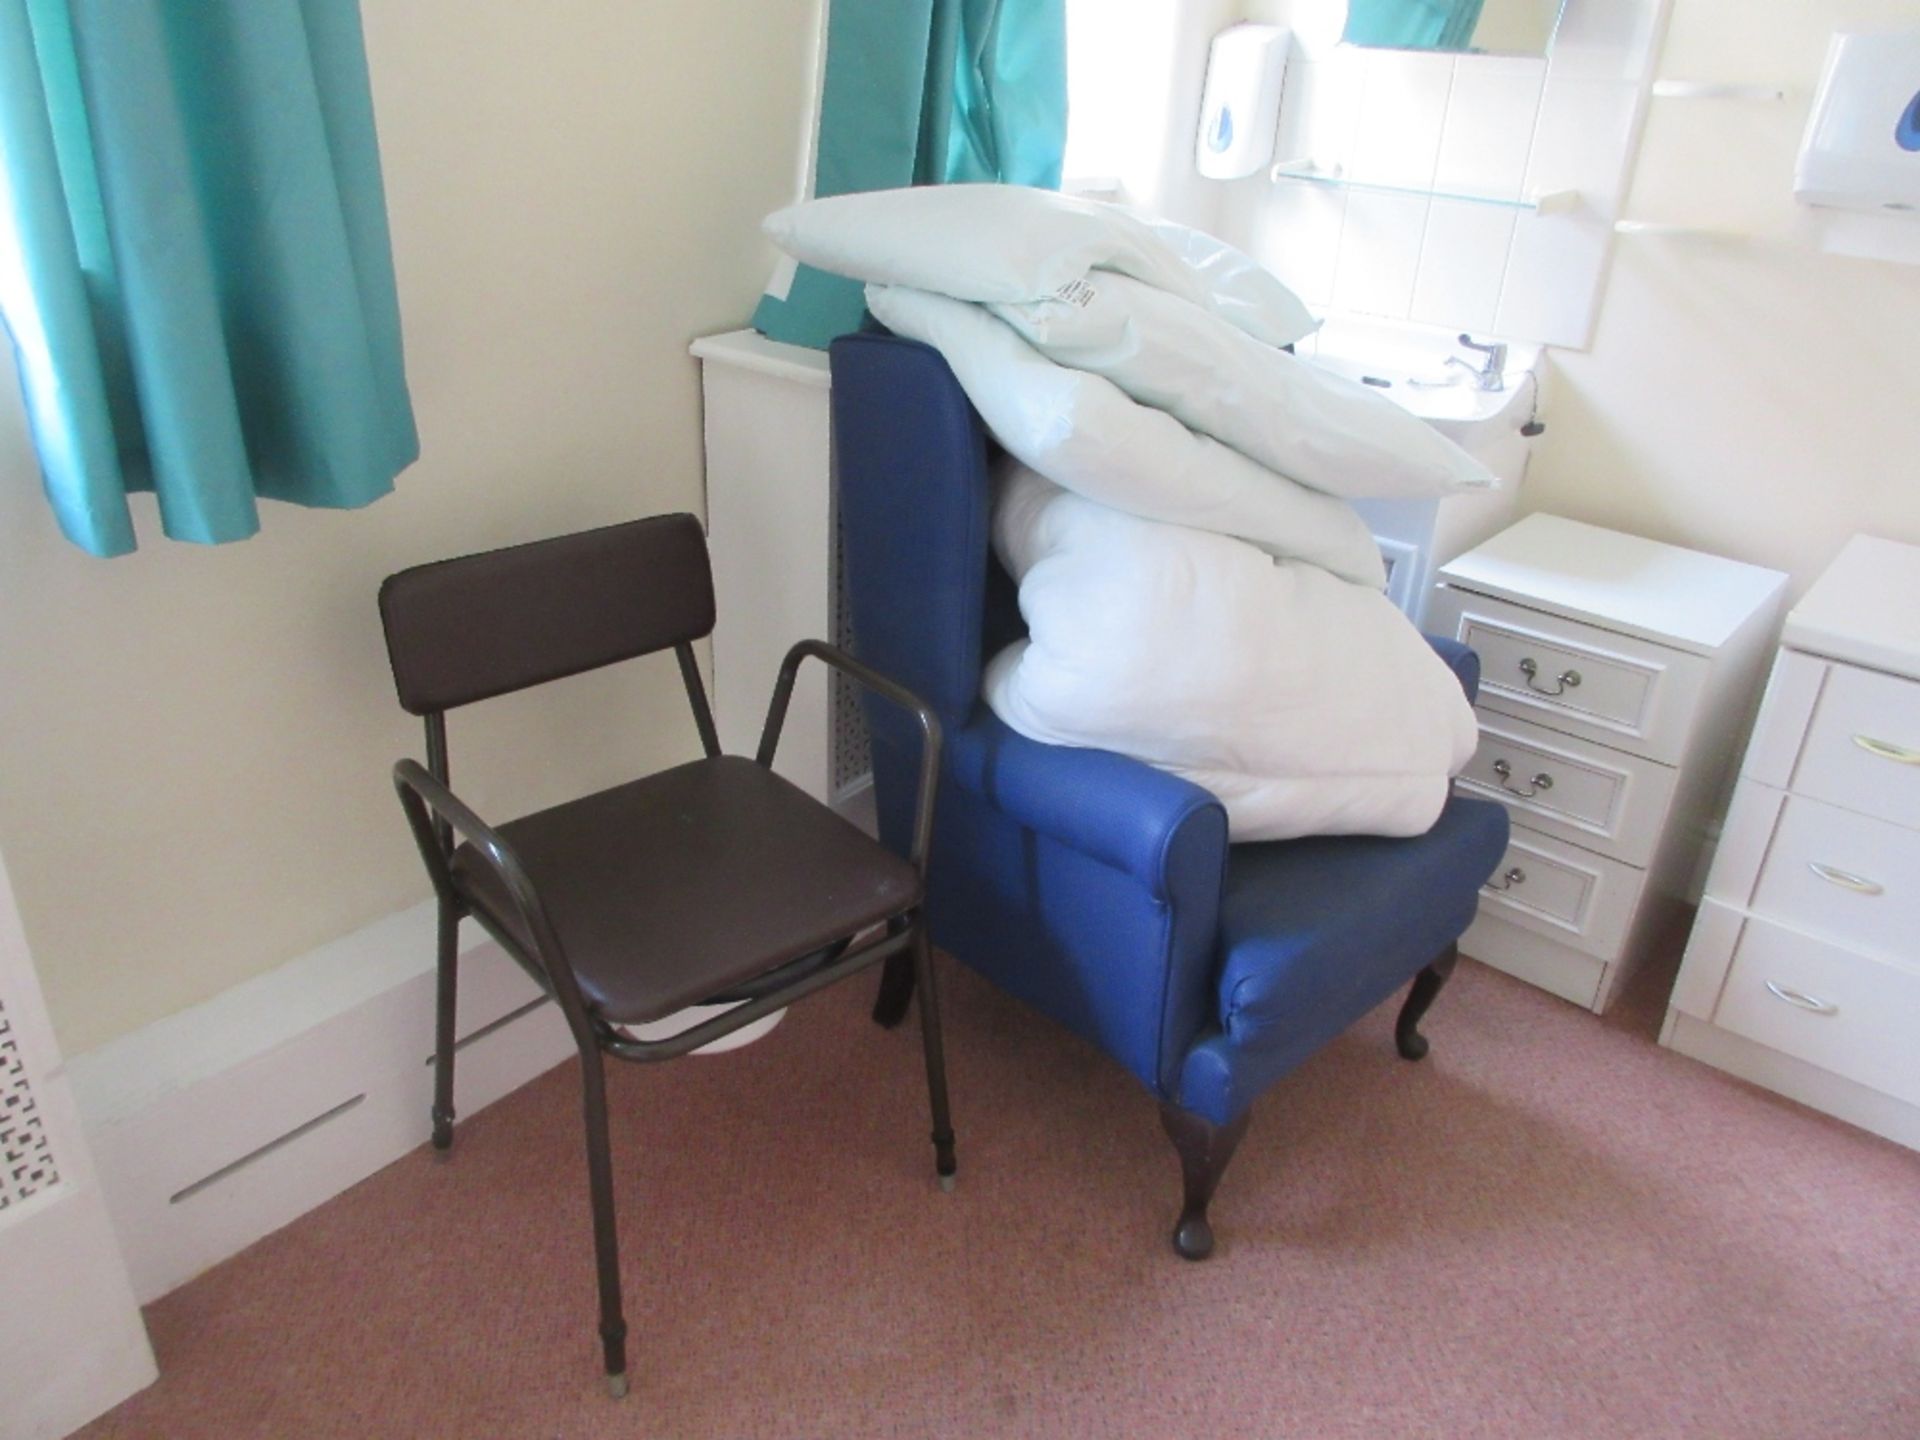 Contents of Room 8 to include: wardrobe, three drawer bedside cabinet, chair, sensor mat, commode